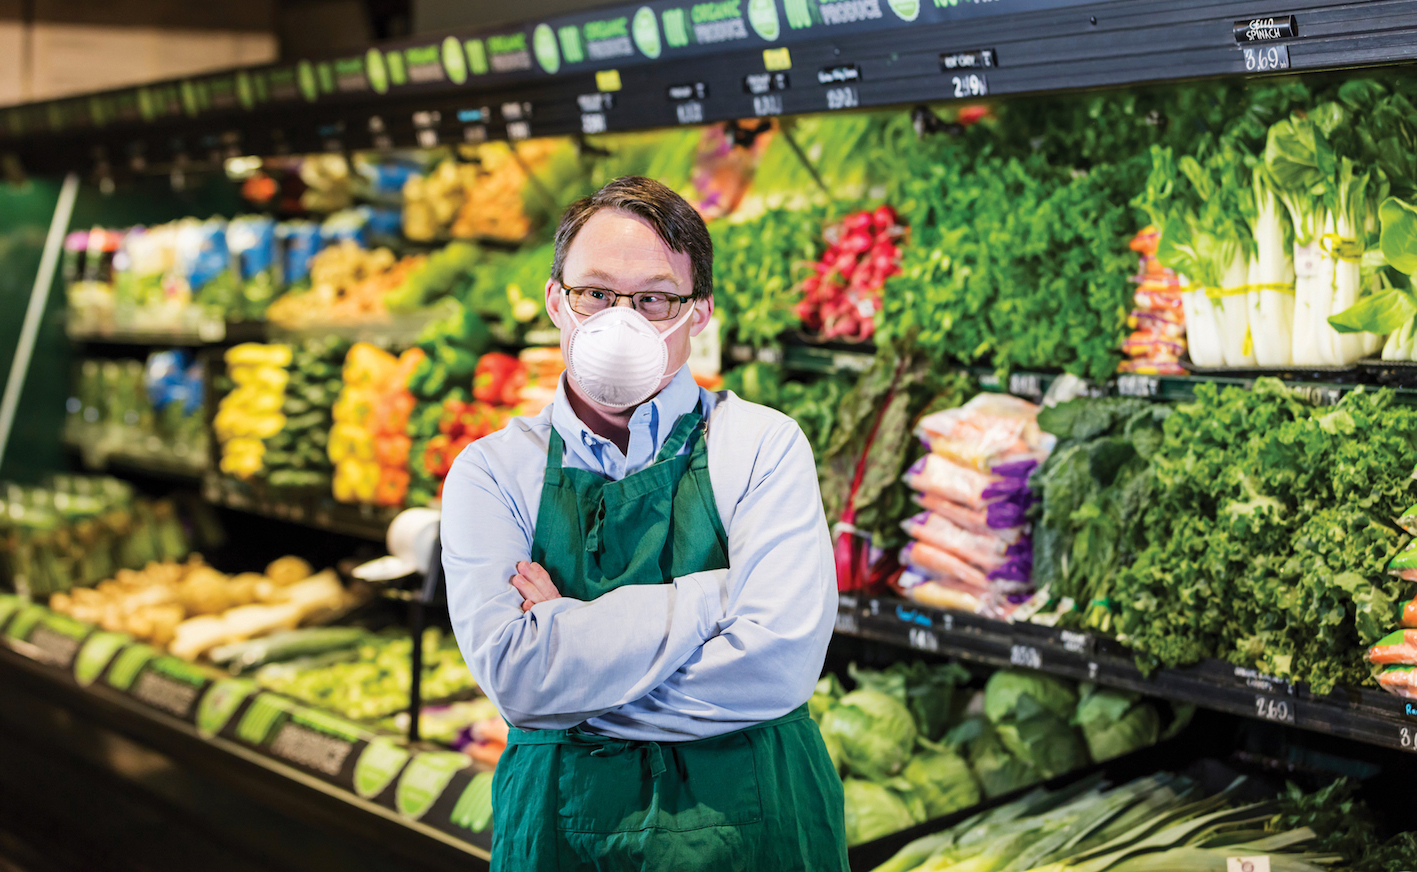 A male grocery store worker wearing a mask and standing in front of vegetables.